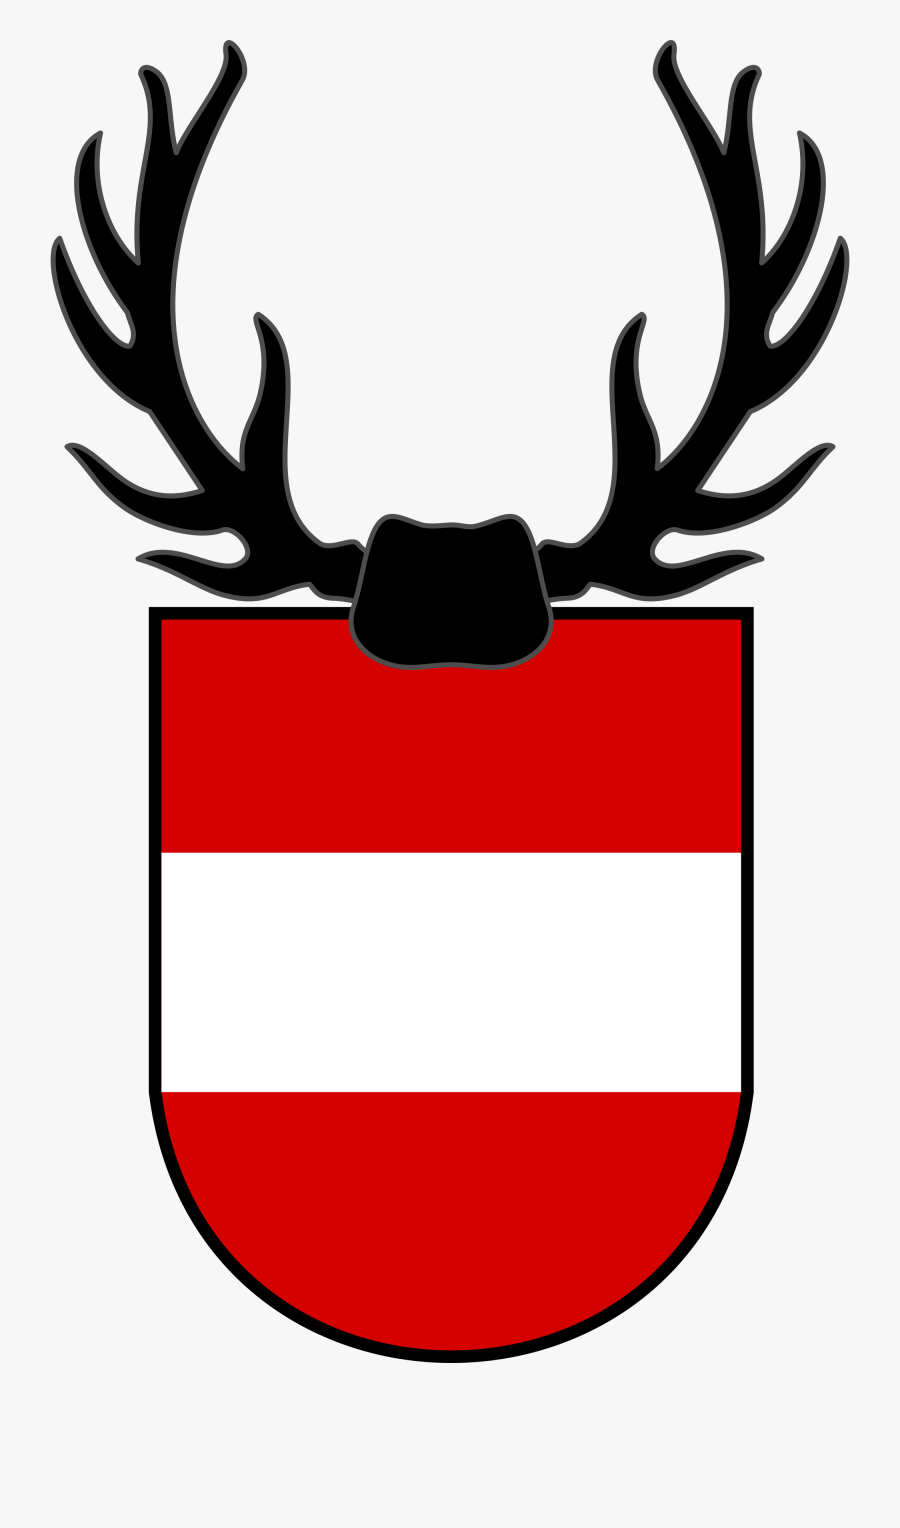 Excelent For Free Download - Antlers Coat Of Arms, Transparent Clipart